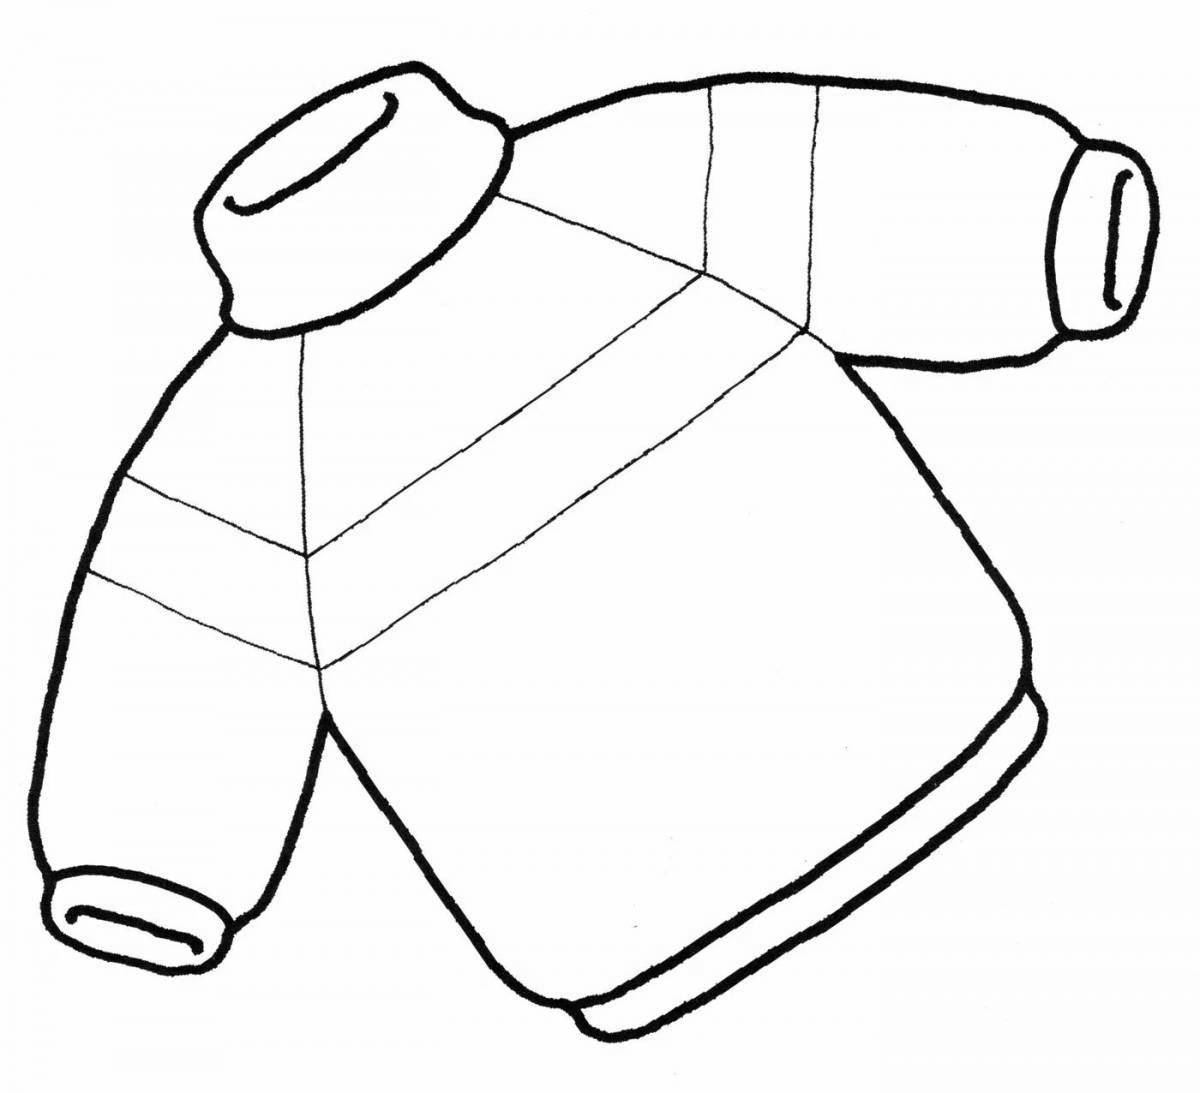 Colorful winter clothes coloring page for kids